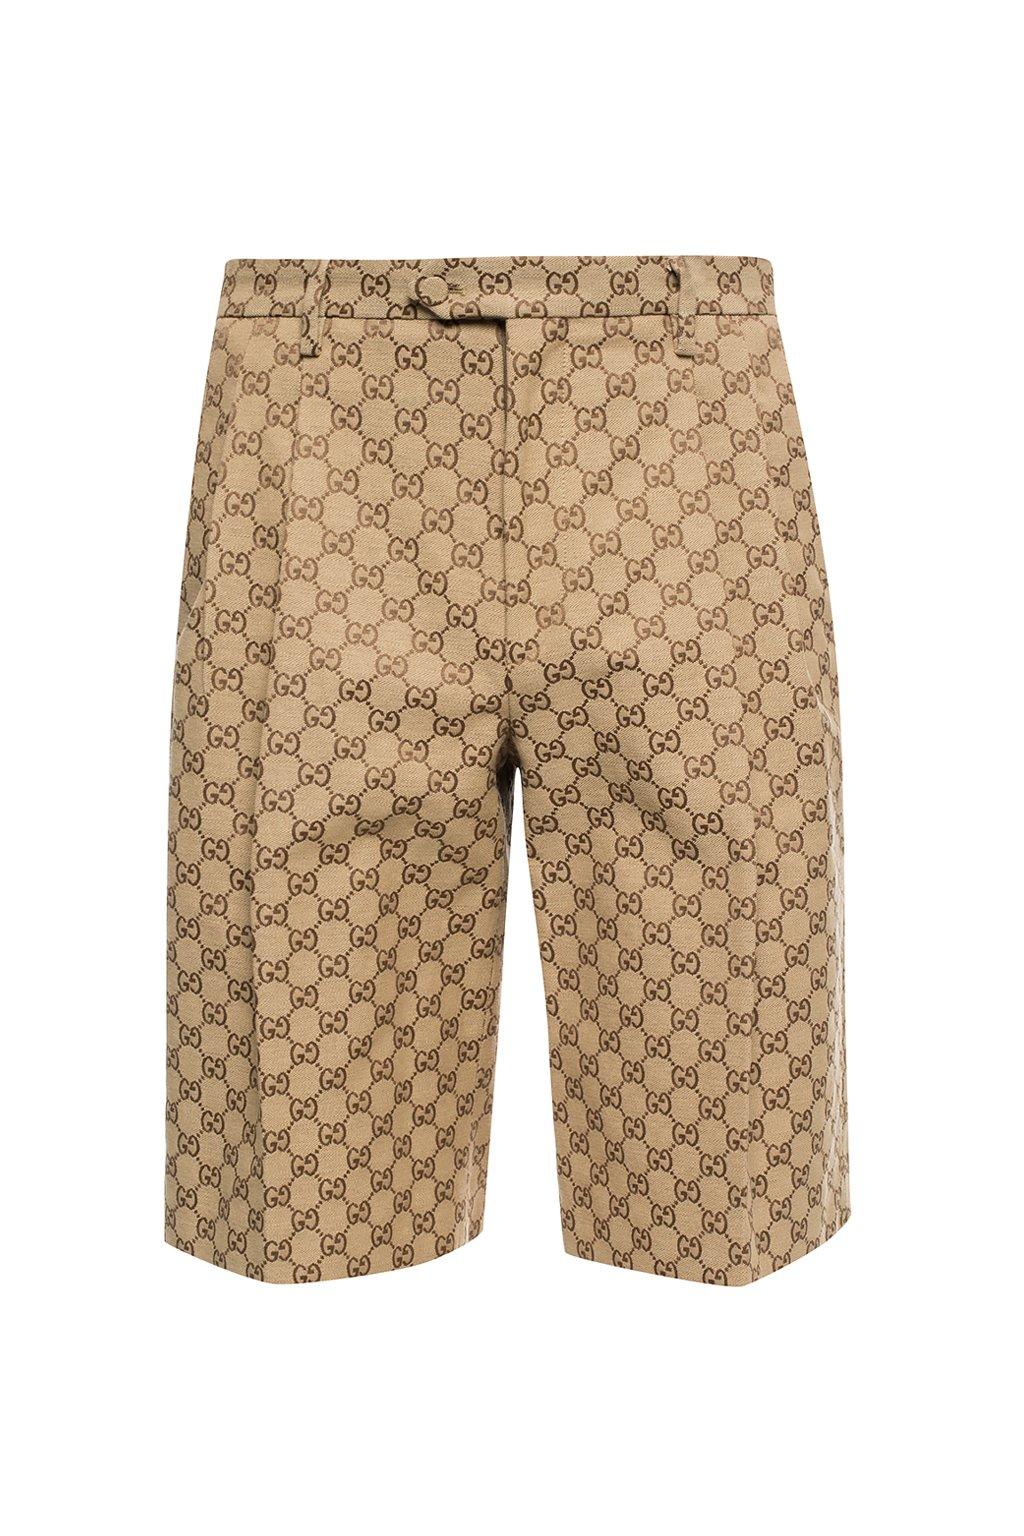 opwinding Bestuiver vriendschap Gucci Gg Canvas Shorts in Natural for Men | Lyst